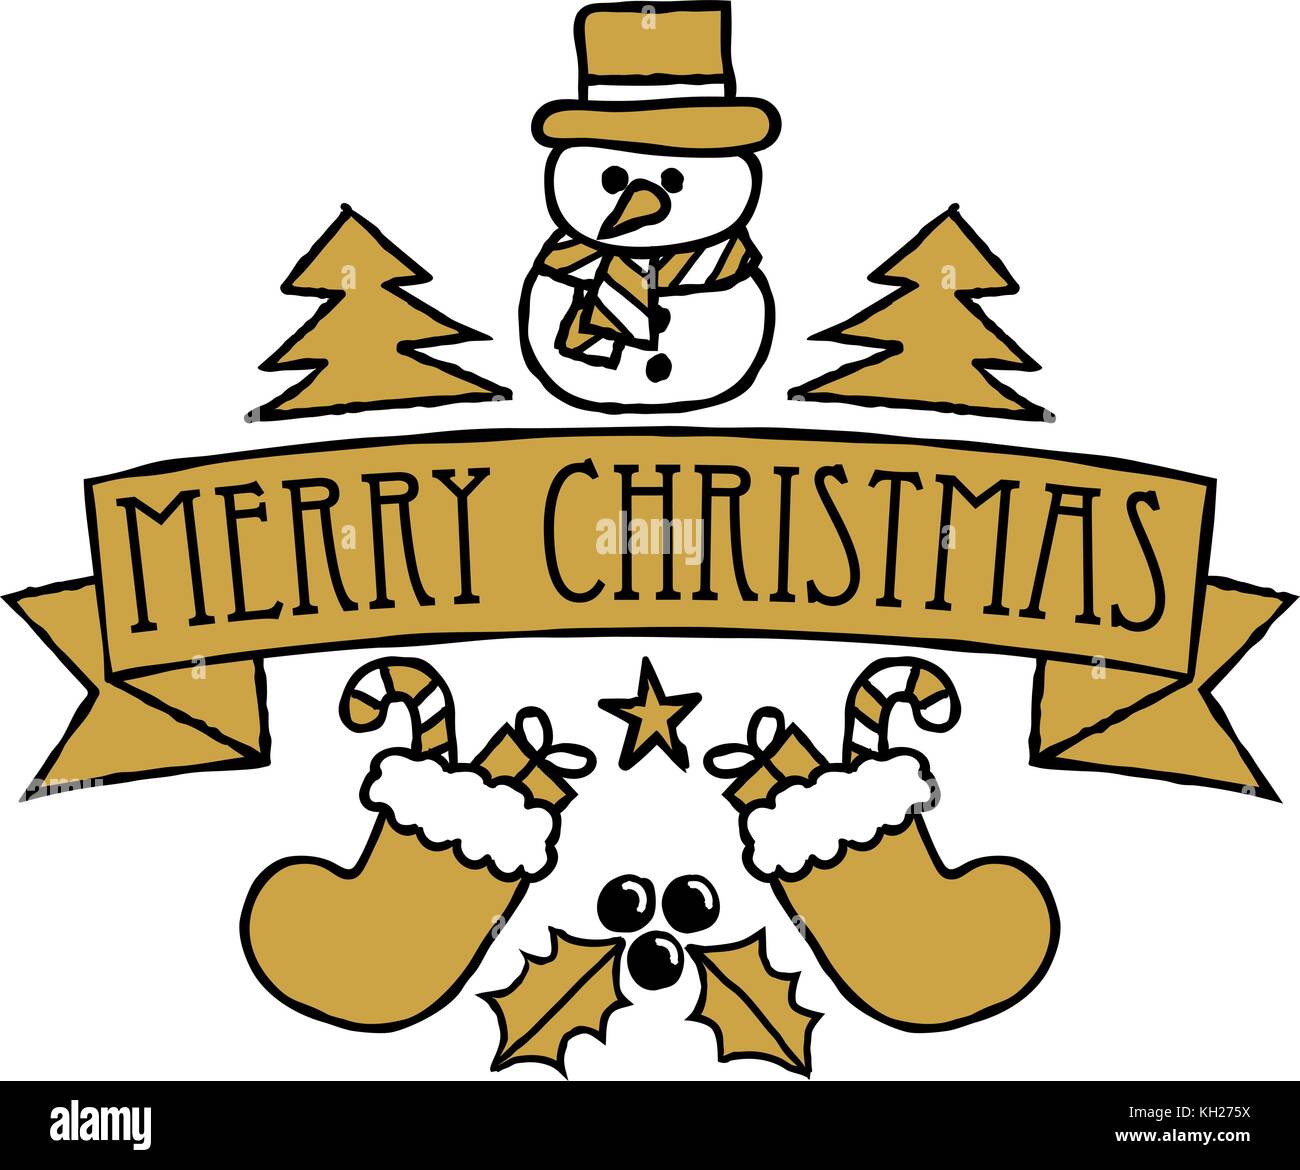 Merry Christmas Greetings Label Design Stock Vector